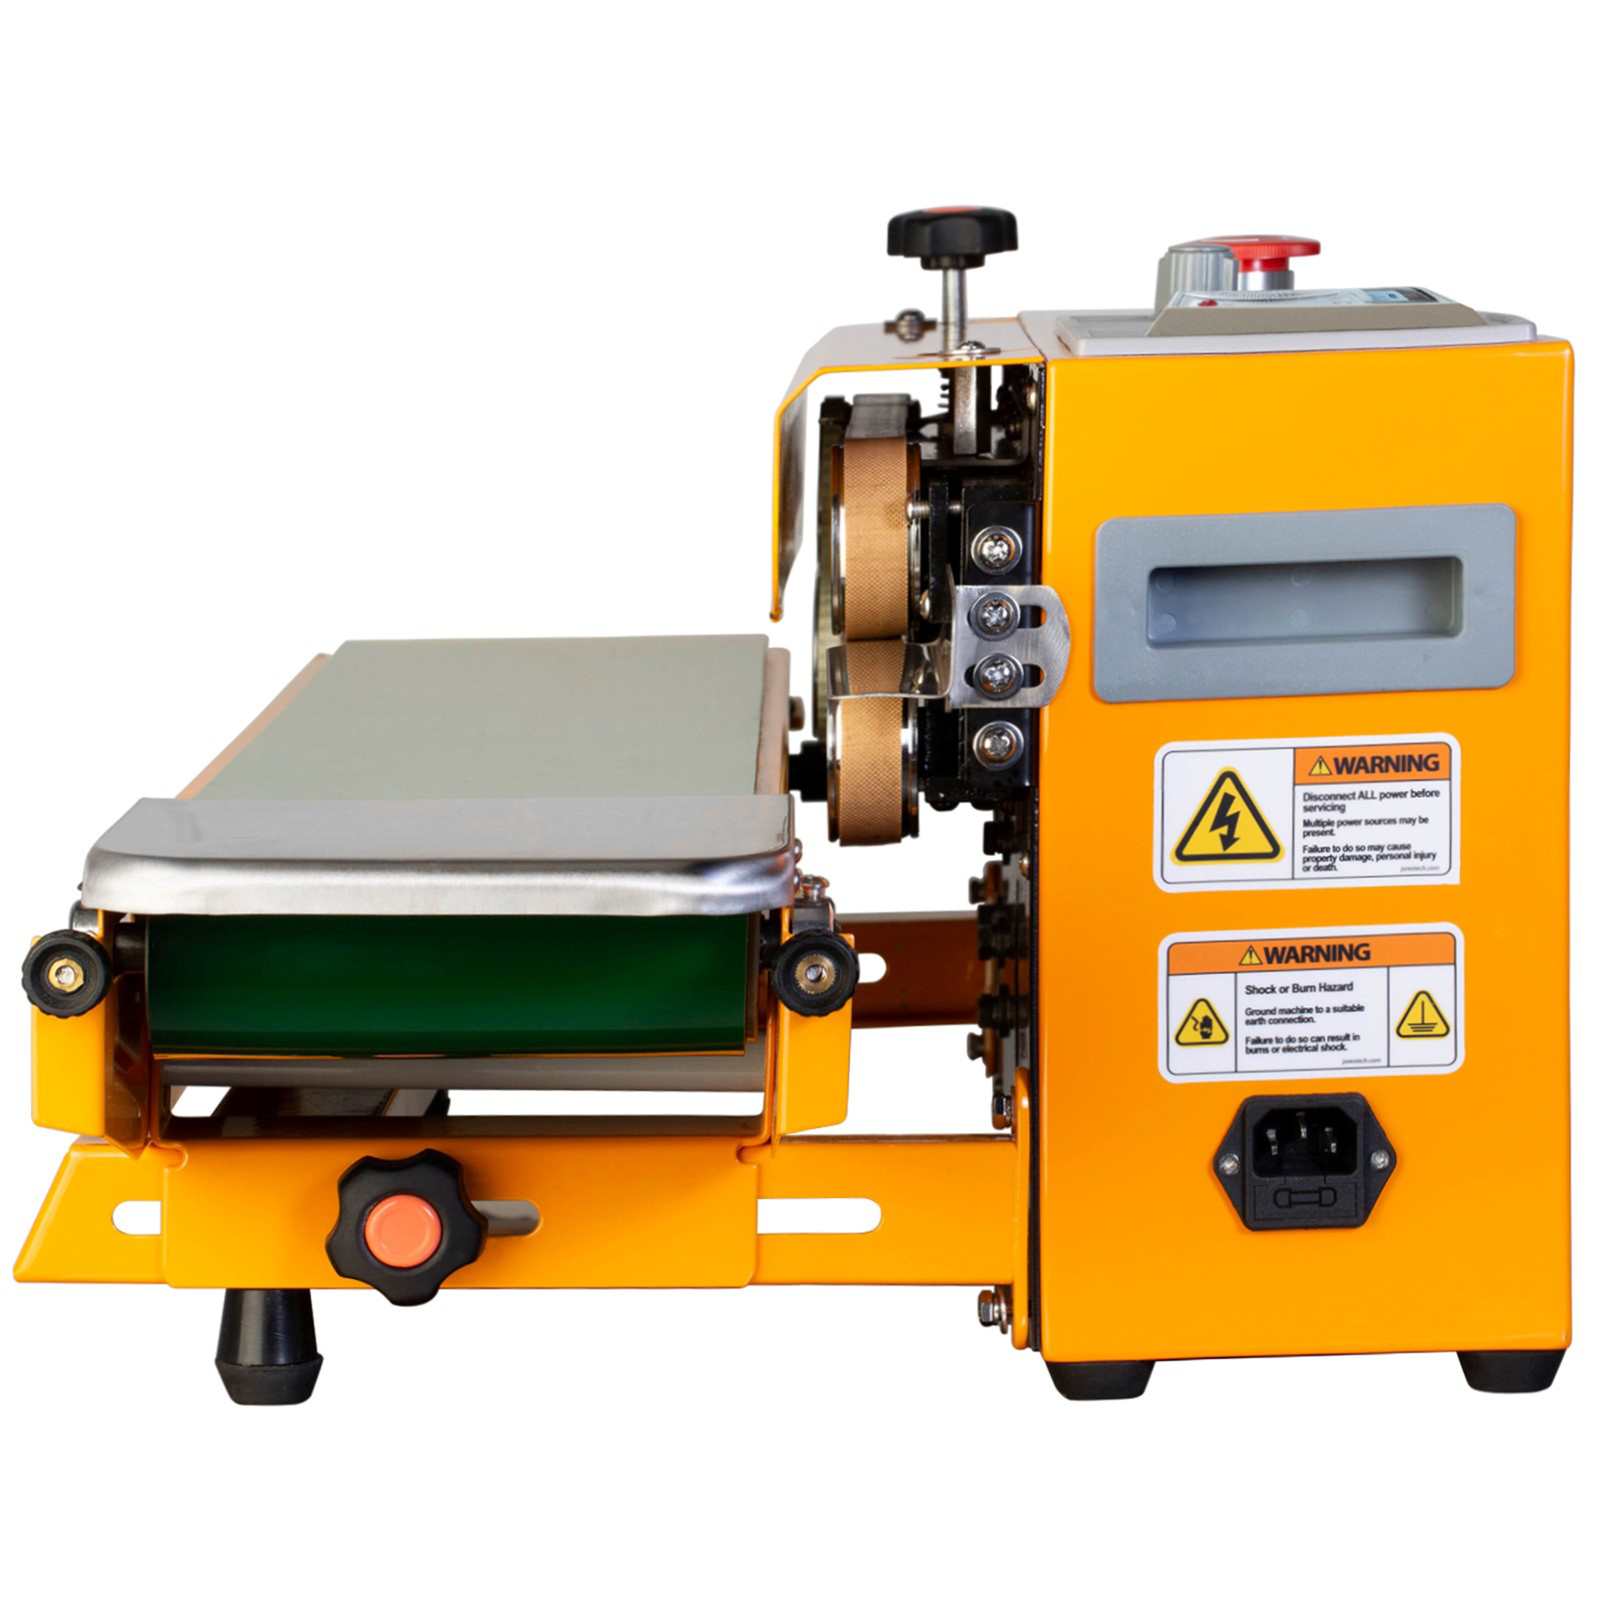 side view of yellow JORES TECHNOLOGIES® continuous band sealing machine with green revolving band